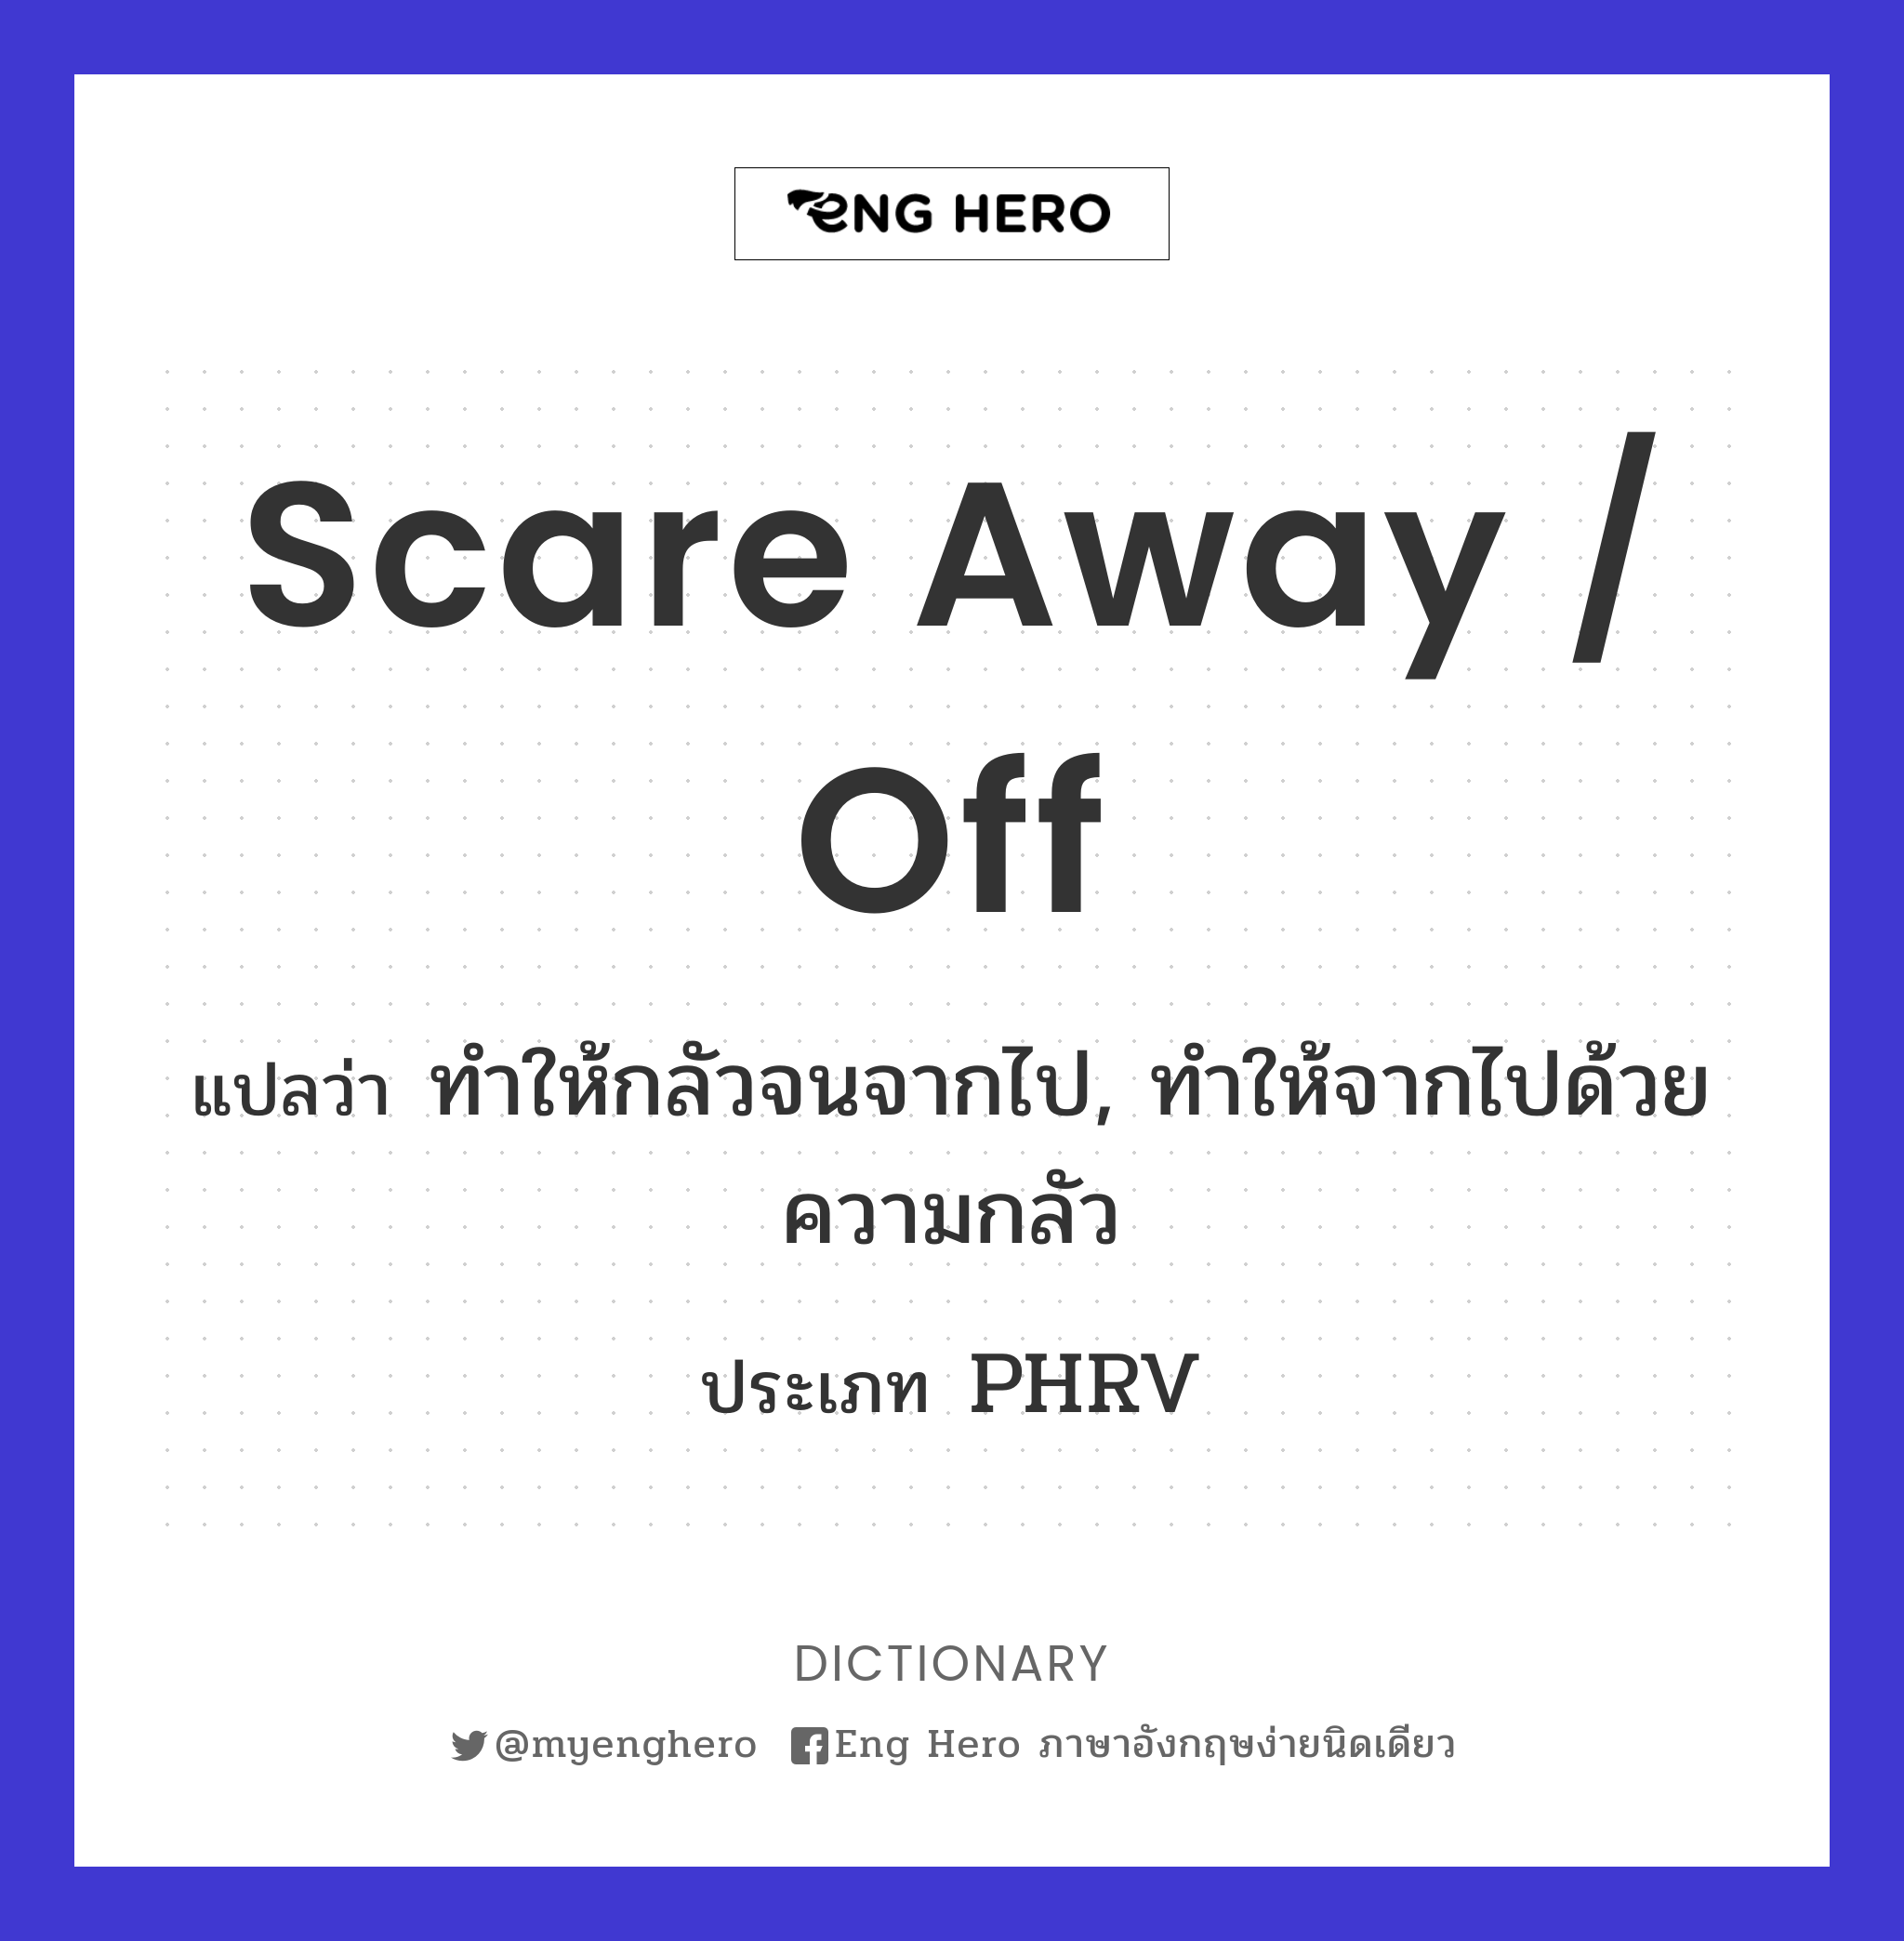 scare away / off